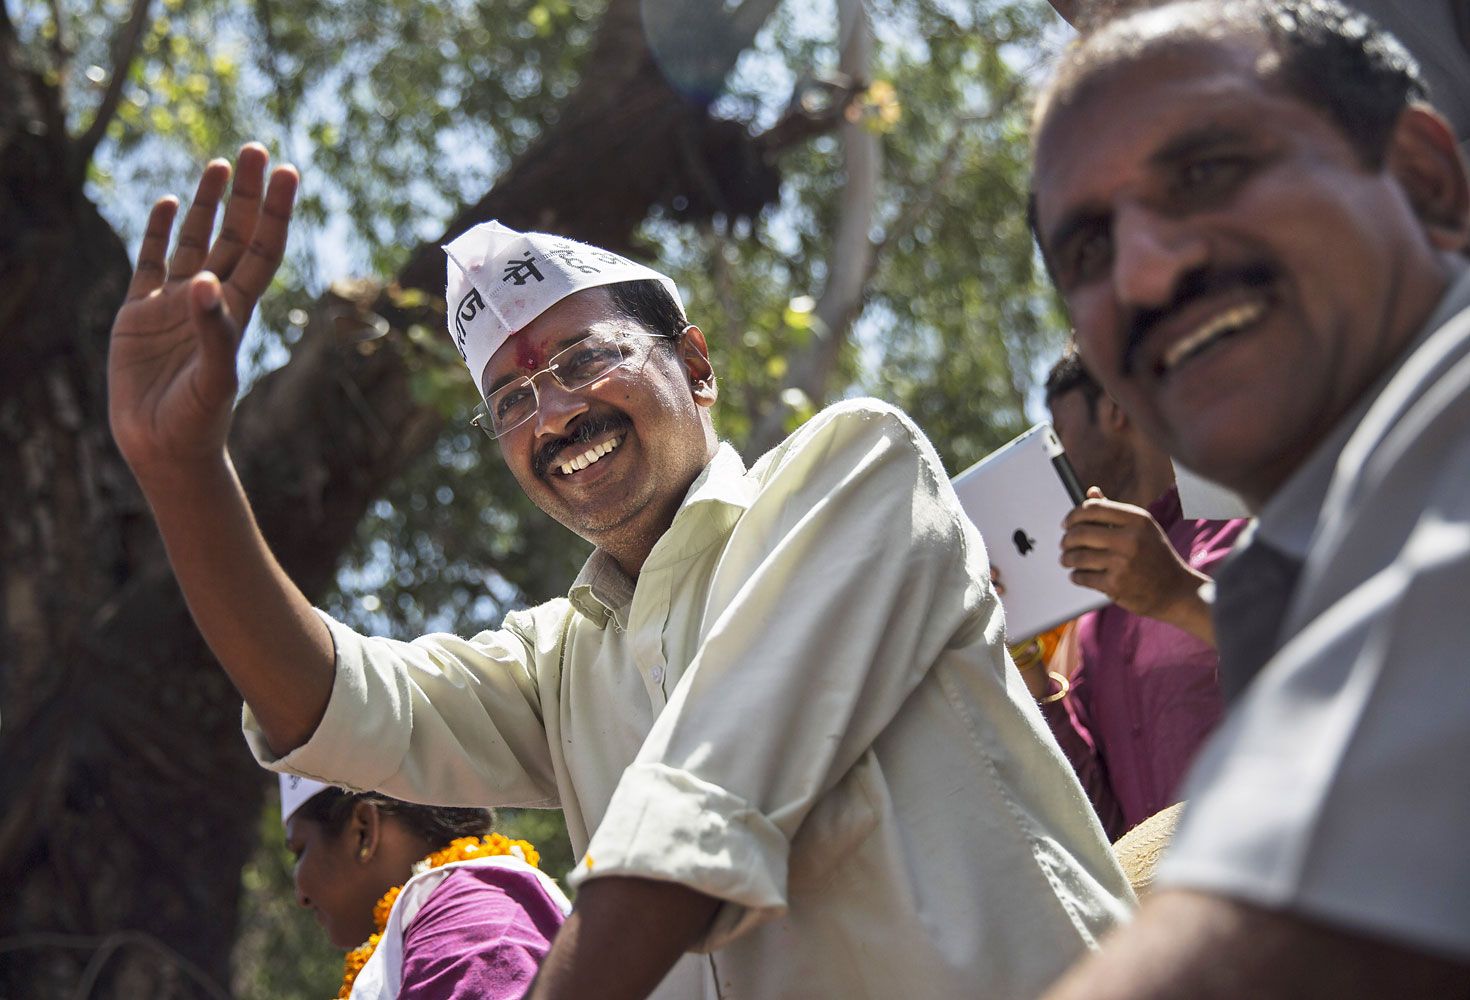 Leader of the AAP and anti-corruption activist  Arvind Kejriwal waves to supporters while campaigning on April 8, 2014 in New Delhi. (Kevin Frayer—Getty Images)